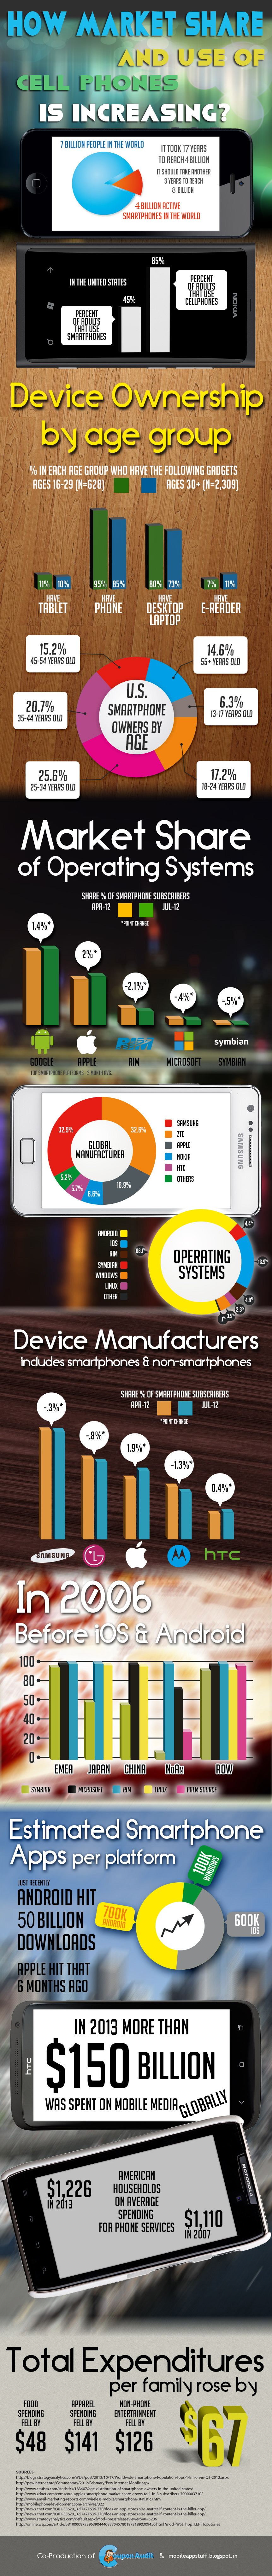 Mobile Market Share and Users Demographics